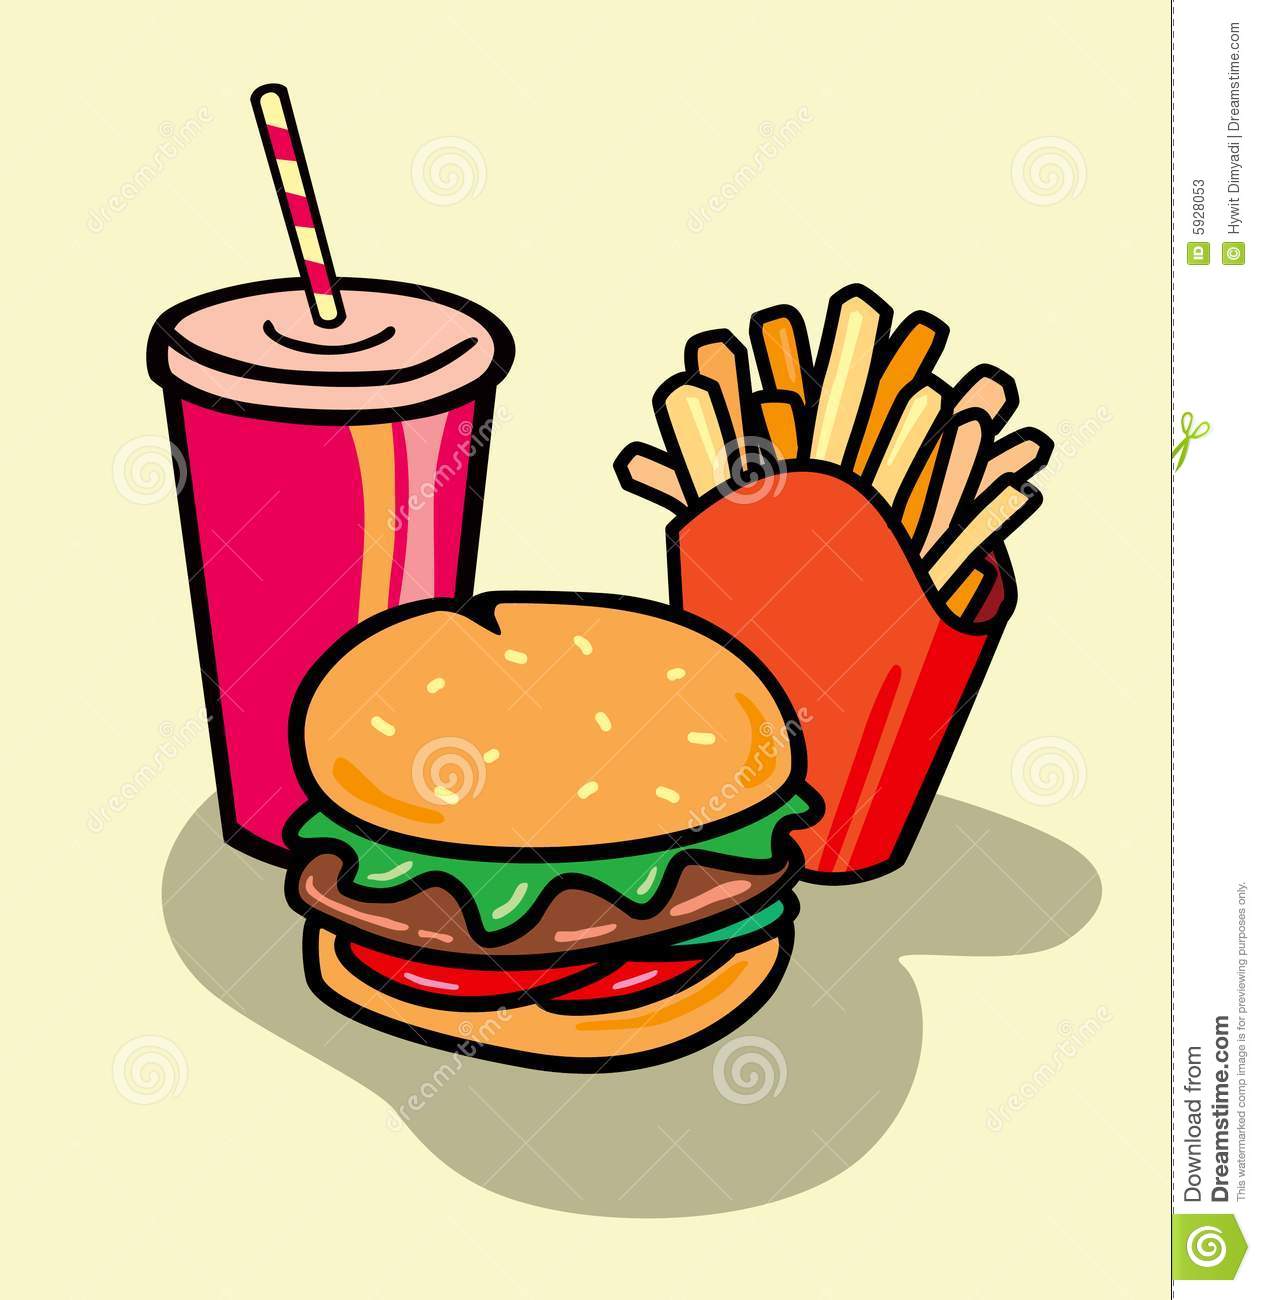 Unhealthy Food Clipart Images   Pictures   Becuo